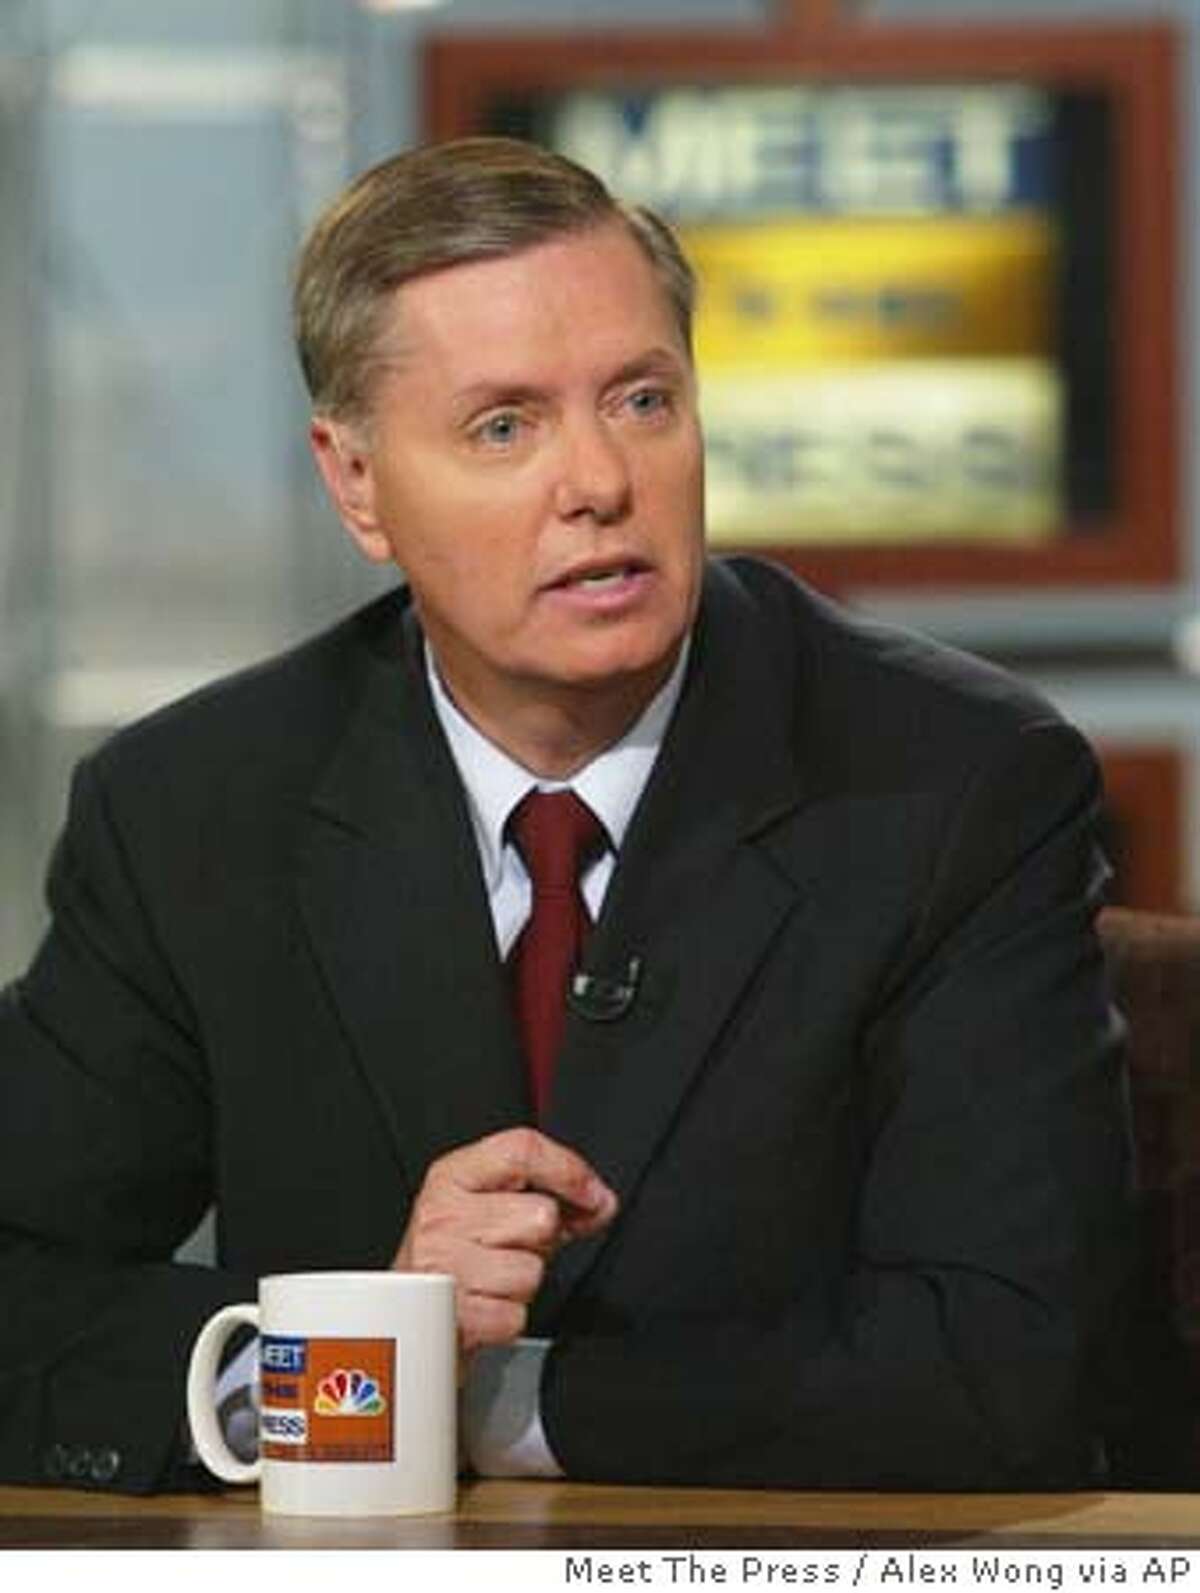 Sen. Lindsey Graham, R-S.C., talks about the Iraq prisoner abuse scandal during the taping of "Meet the Press" at the NBC studios Sunday, May 9, 2004, in Washington. (AP Photo/Meet The Press, Alex Wong) ProductNameChronicle ProductNameChronicle NO ARCHIVE BEFORE MAY 16, 2004 MUST CREDIT "MEET THE PRESS")